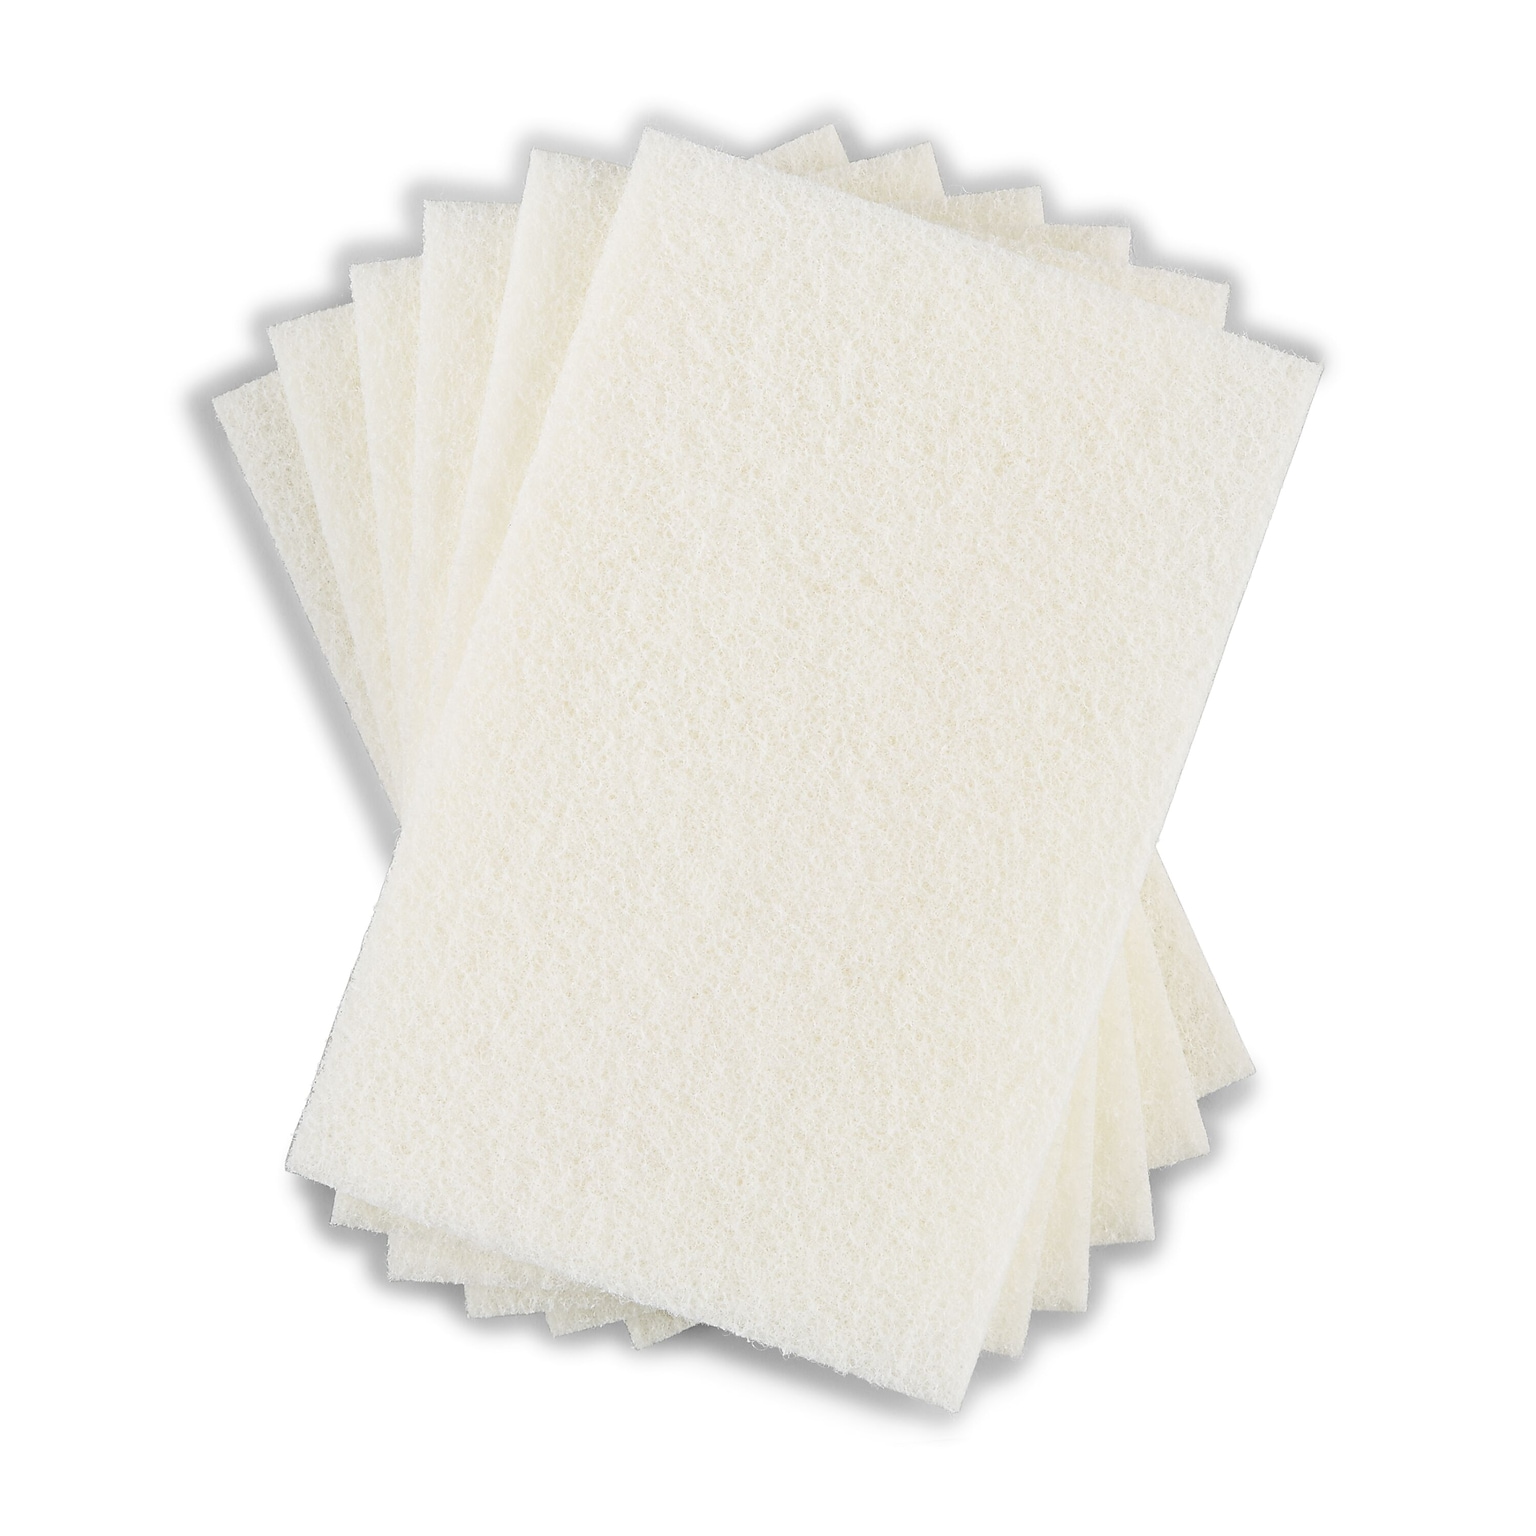 Coastwide Professional™ Light Duty Scouring Pad, White, 60/Pack (CW56788)